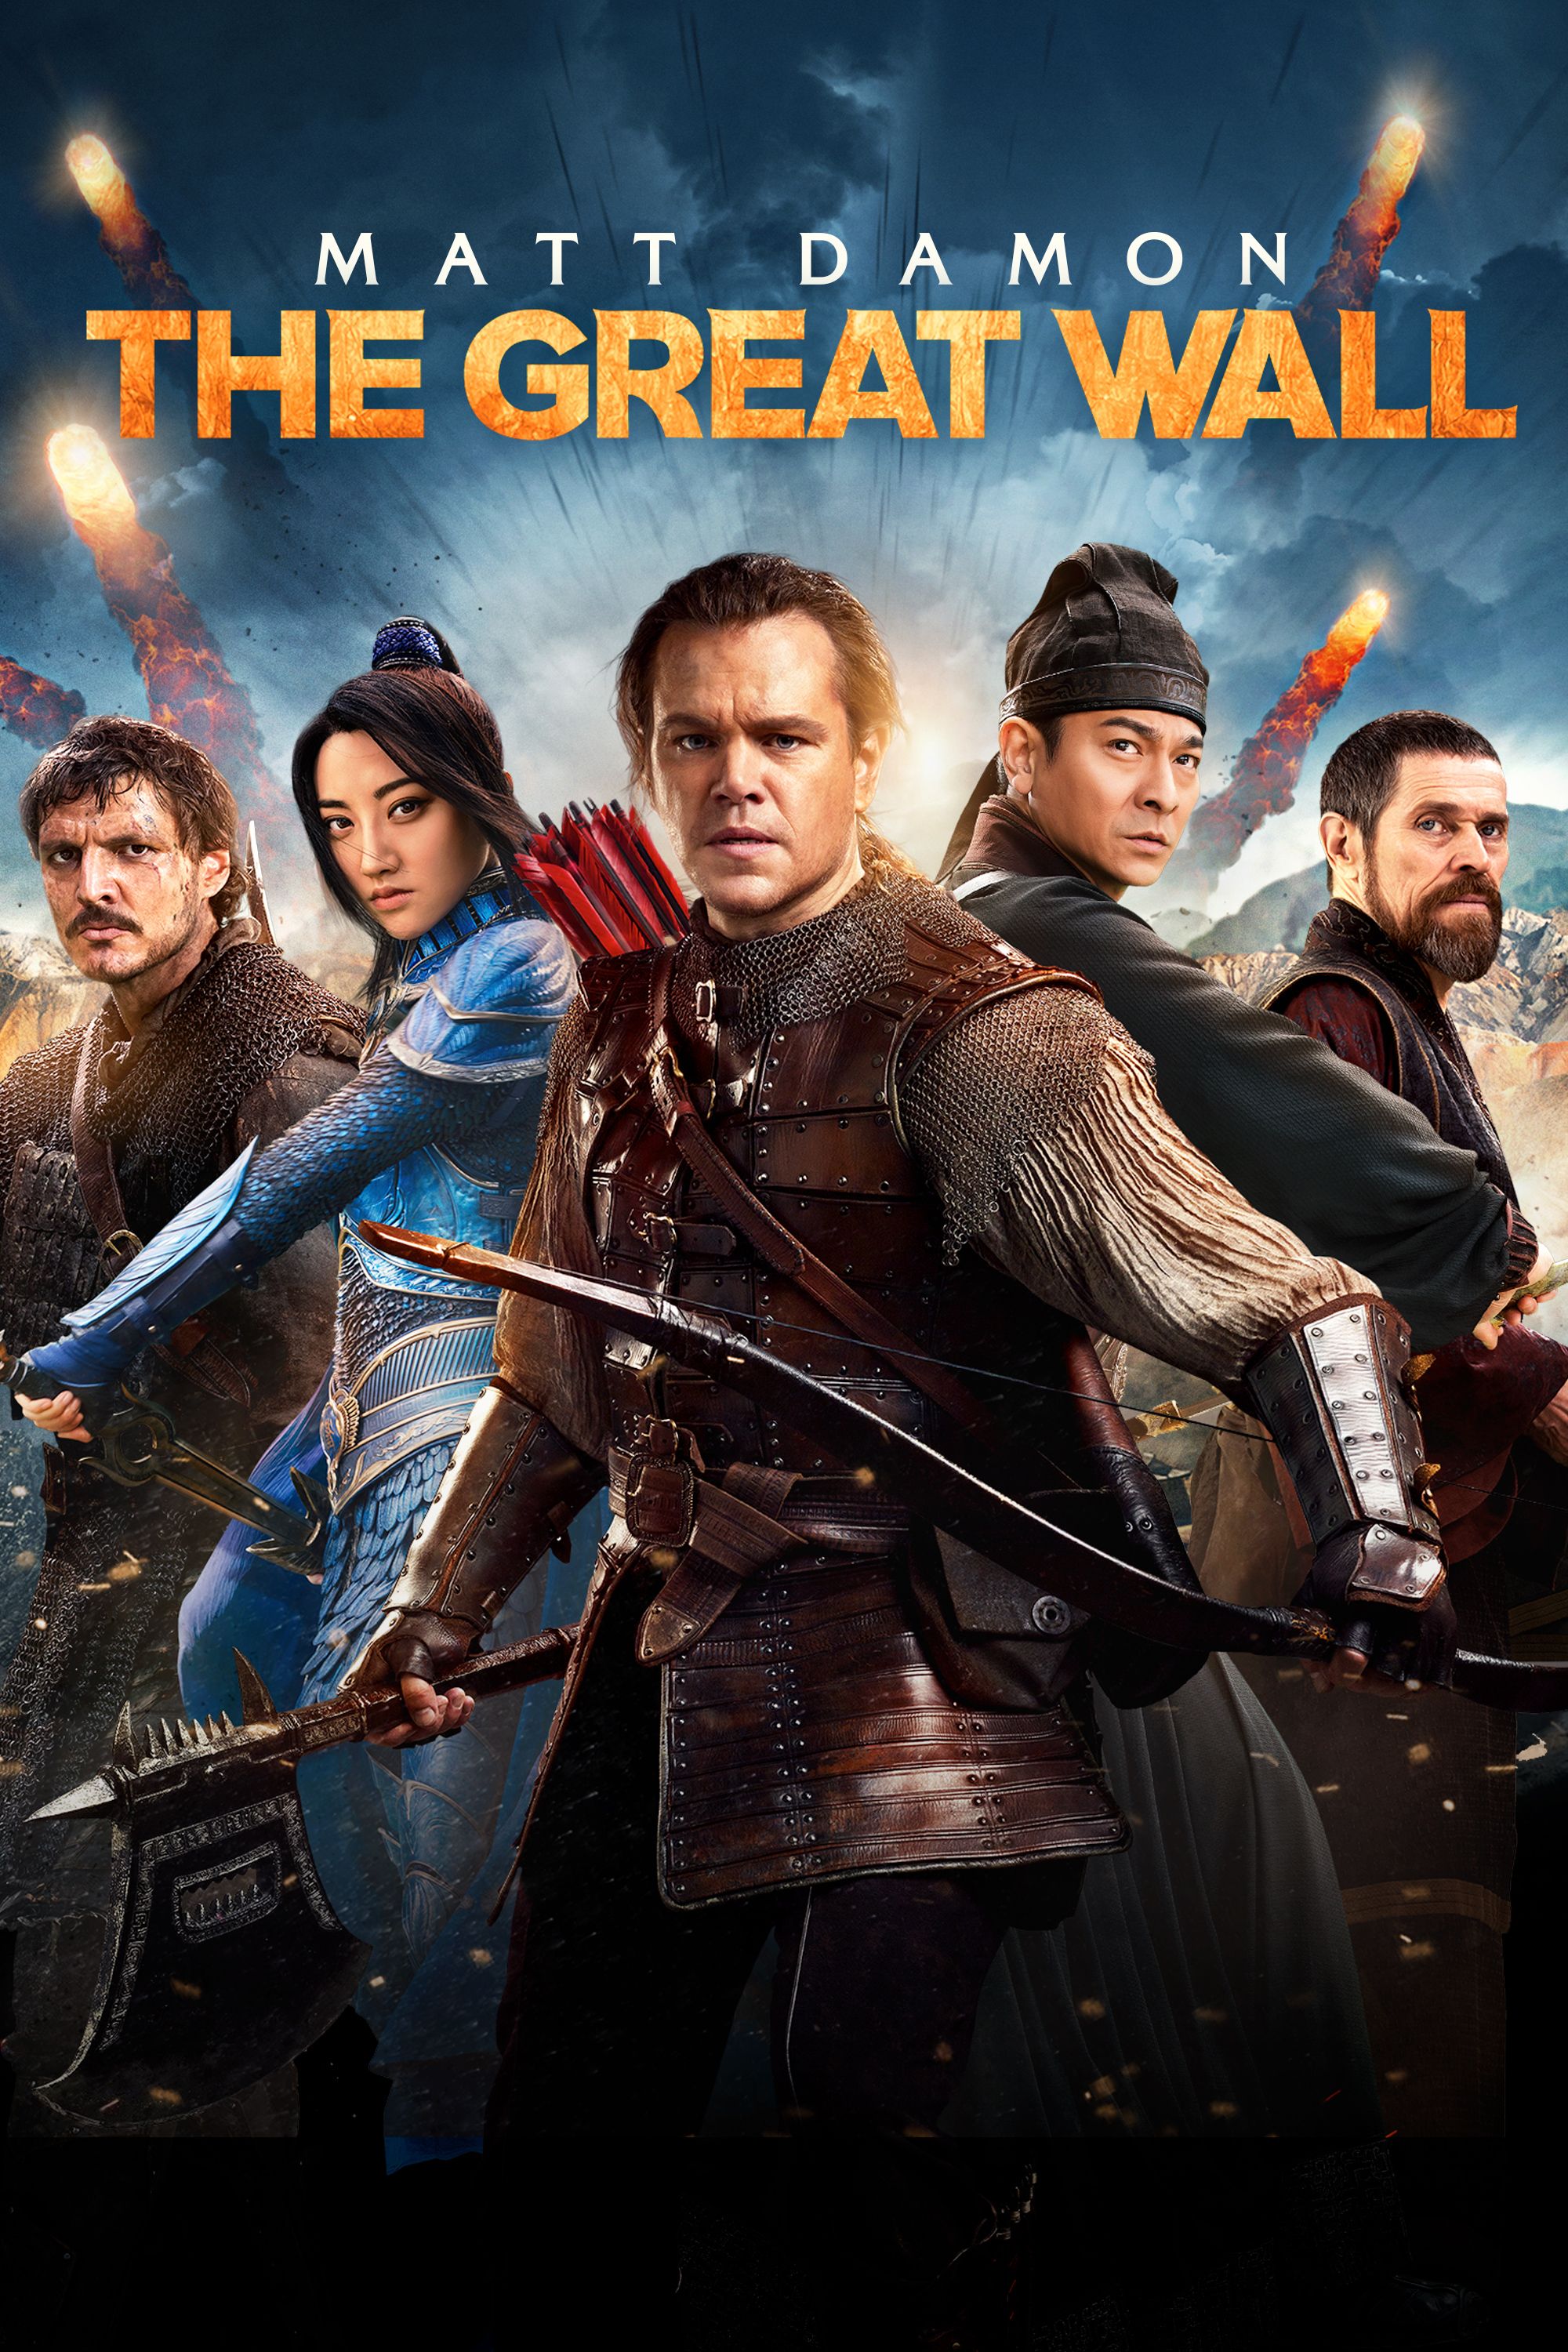 the great wall 2017 full movie free download in hindi 320p